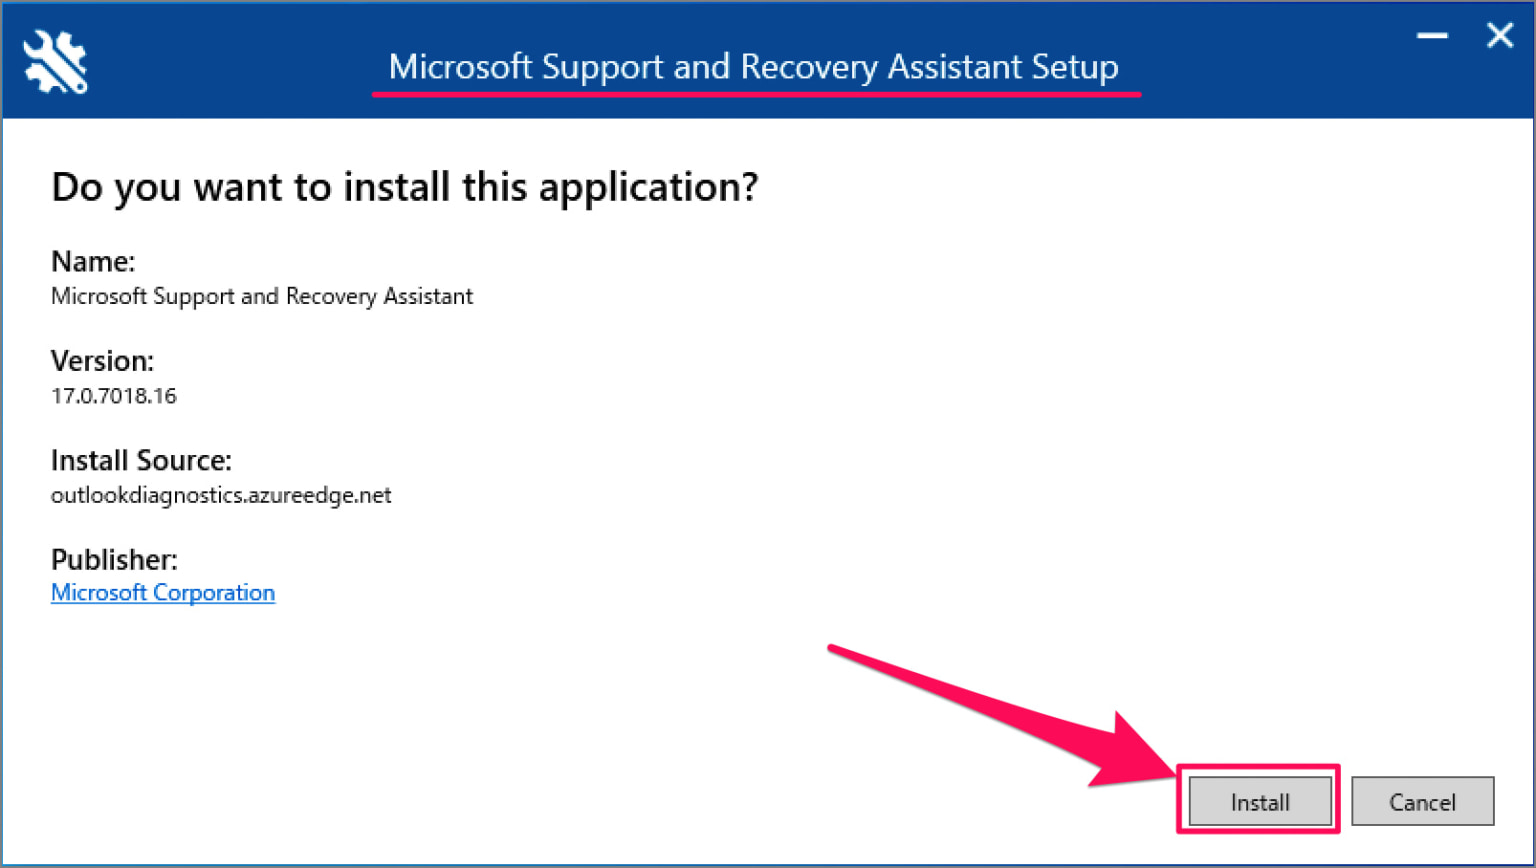 Microsoft Support and Recovery Assistant 17.01.0268.015 free downloads